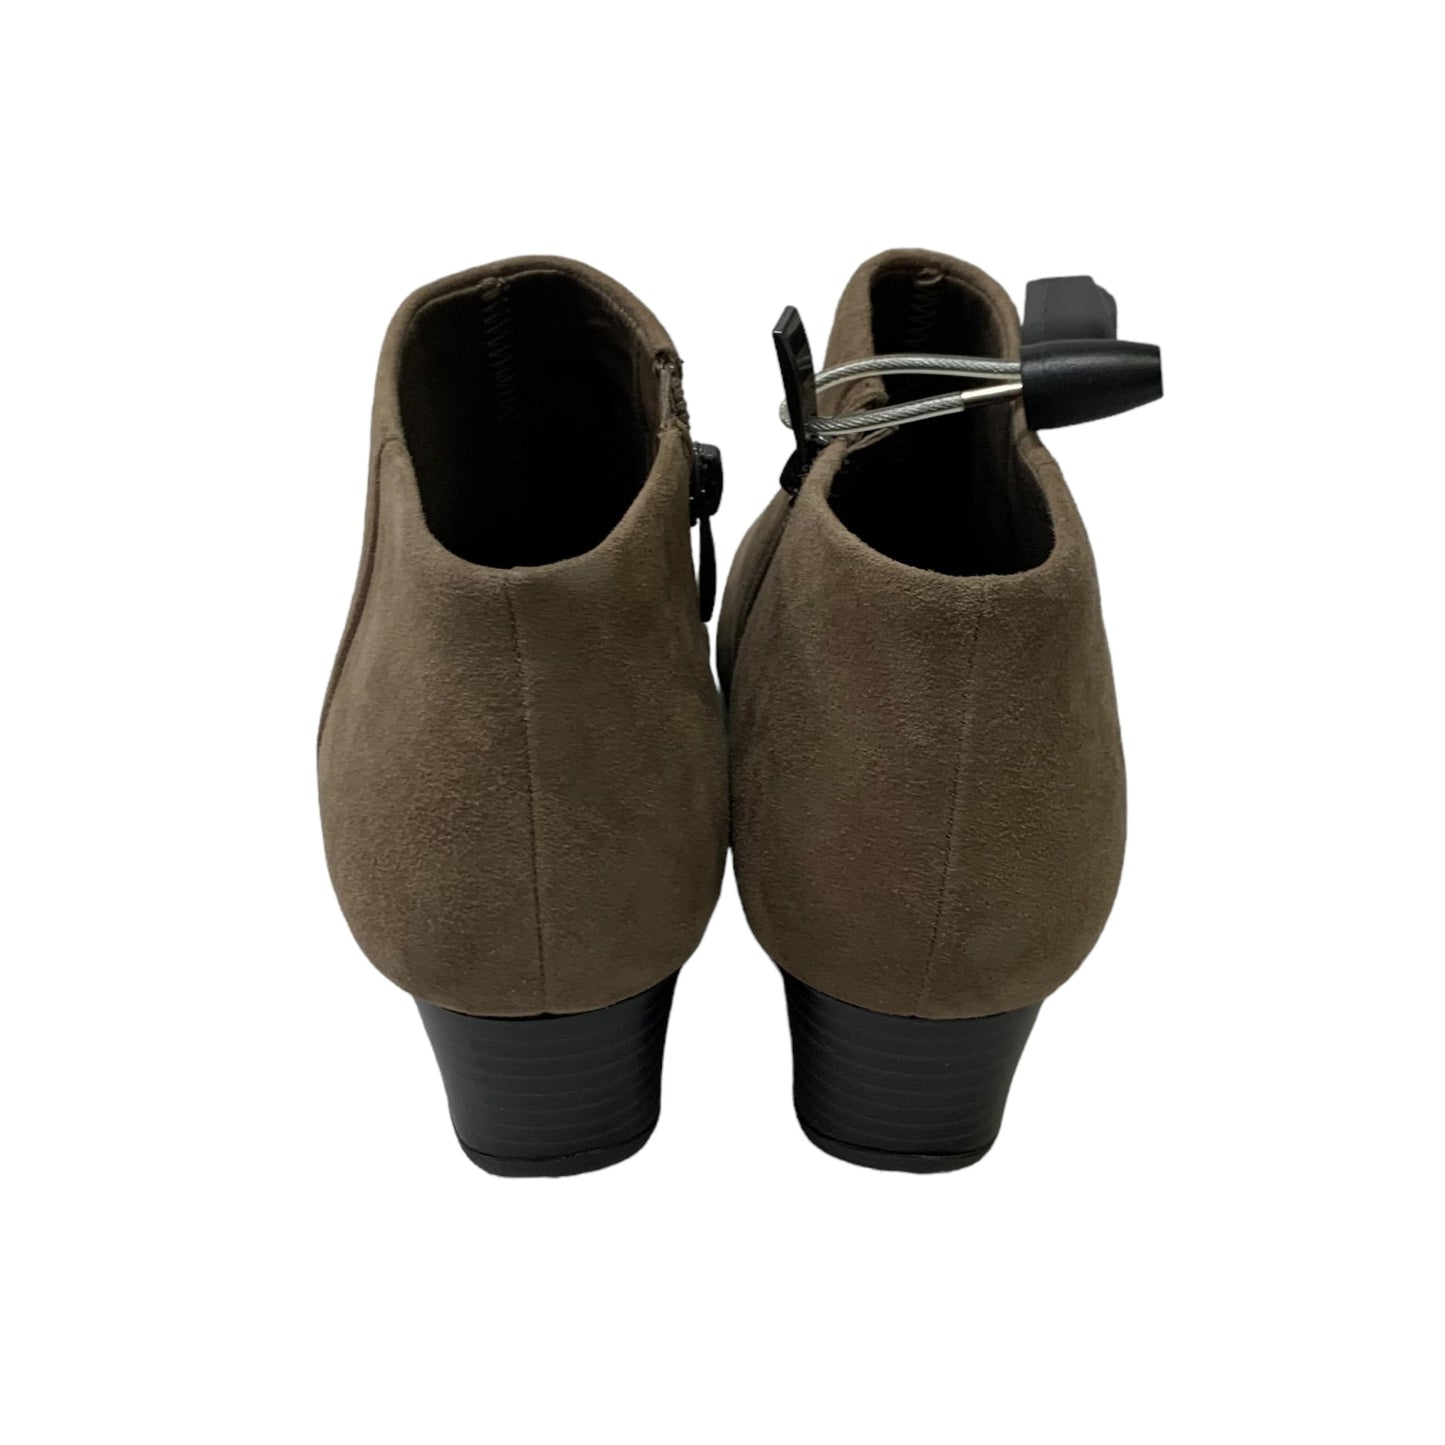 Shoes Heels Wedge By Easy Spirit  Size: 5.5